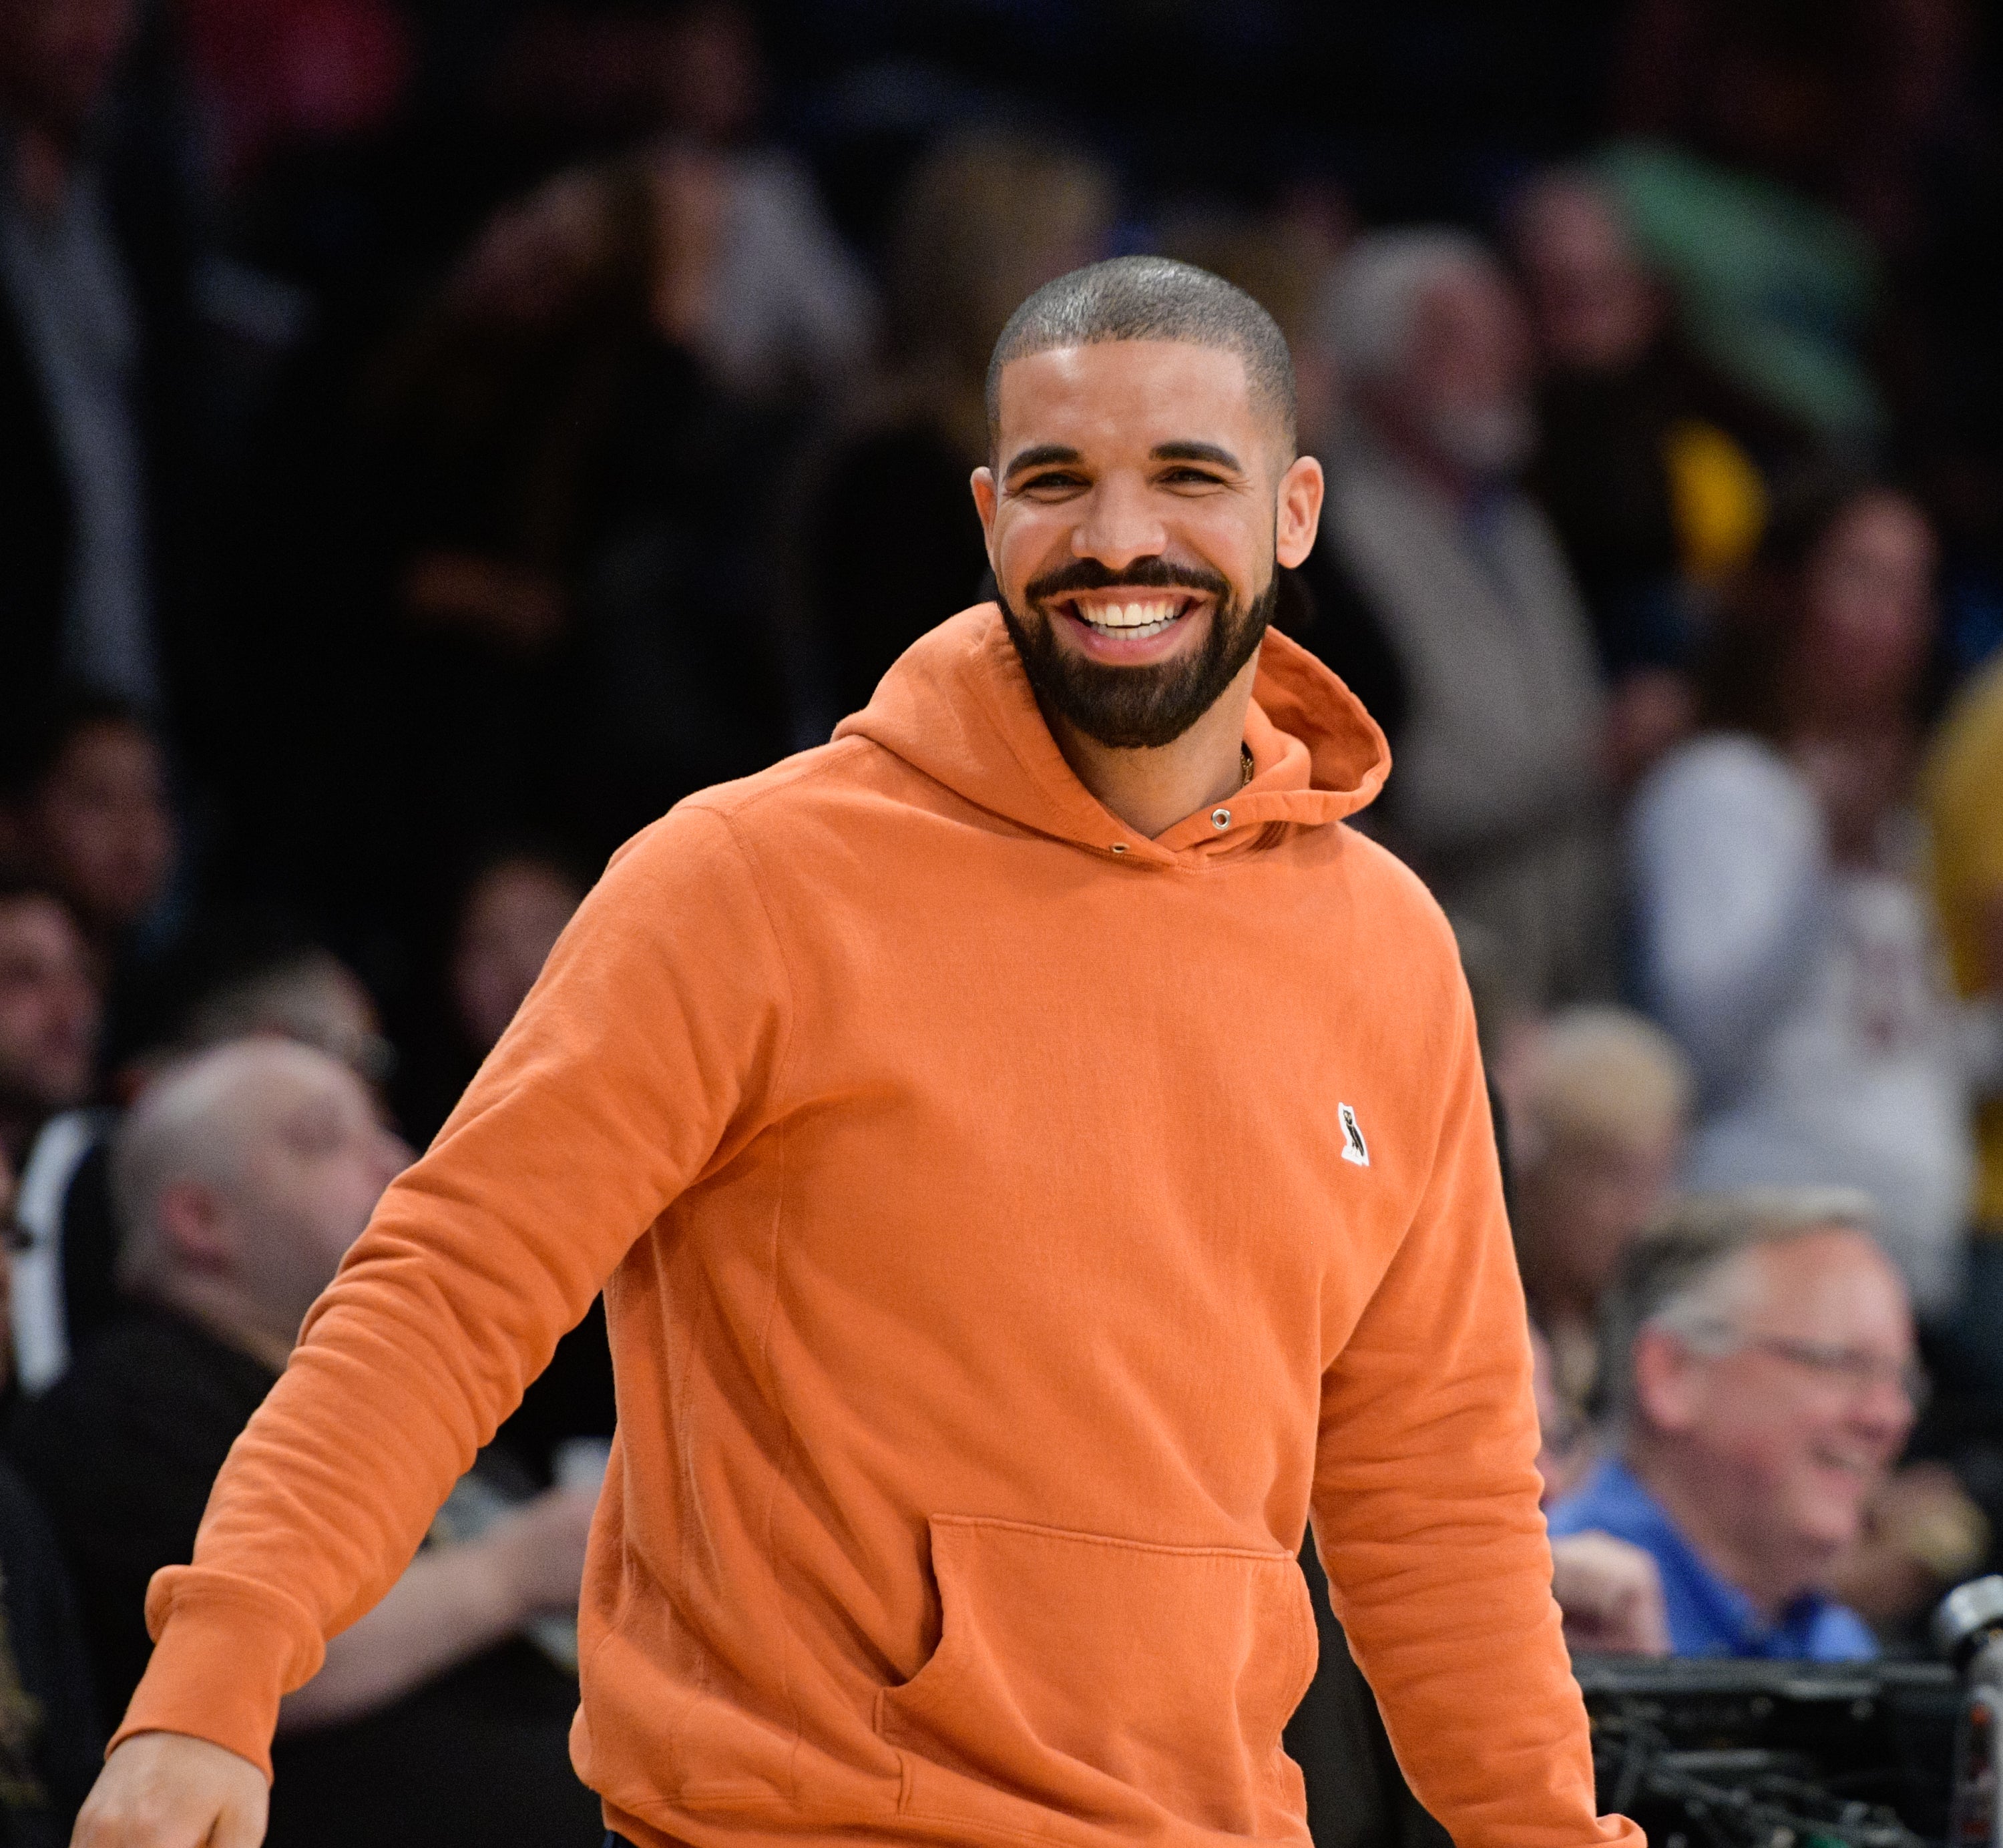 Drake Continues to Be A Nice Guy By Not Pressing Charges Against Fan Who Trespassed
